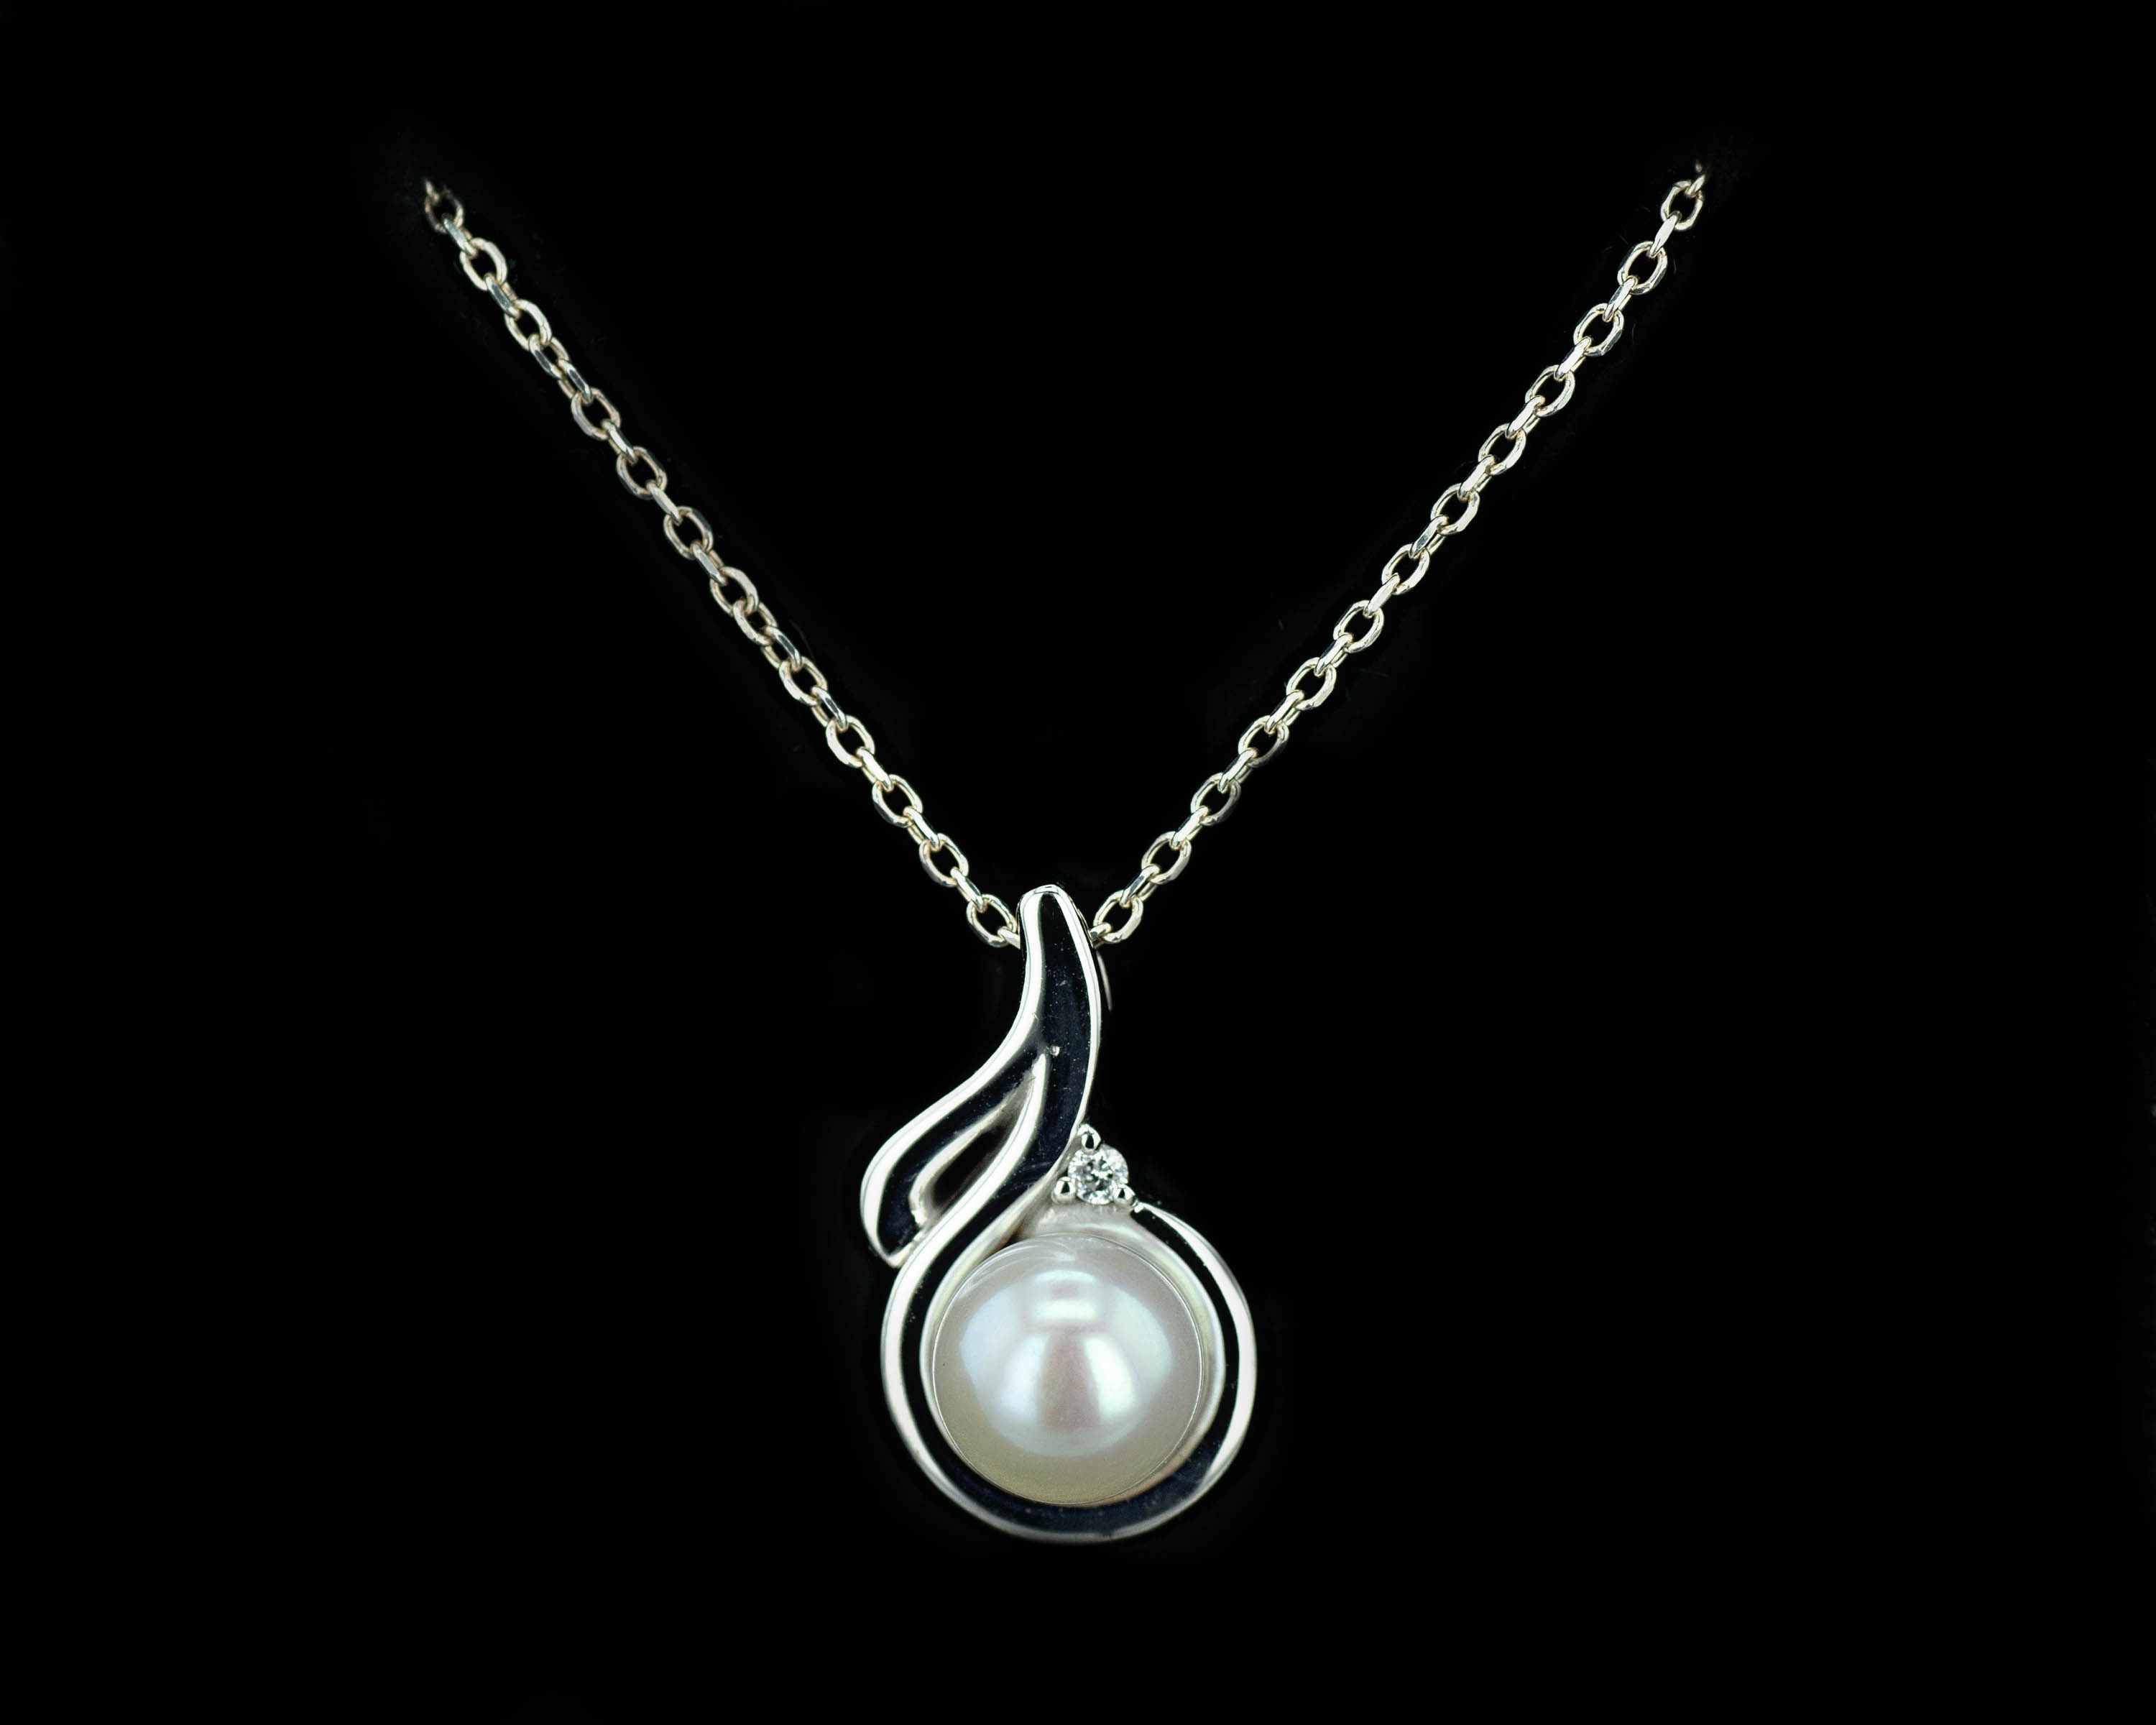 14k White Gold and Pearl Pendant